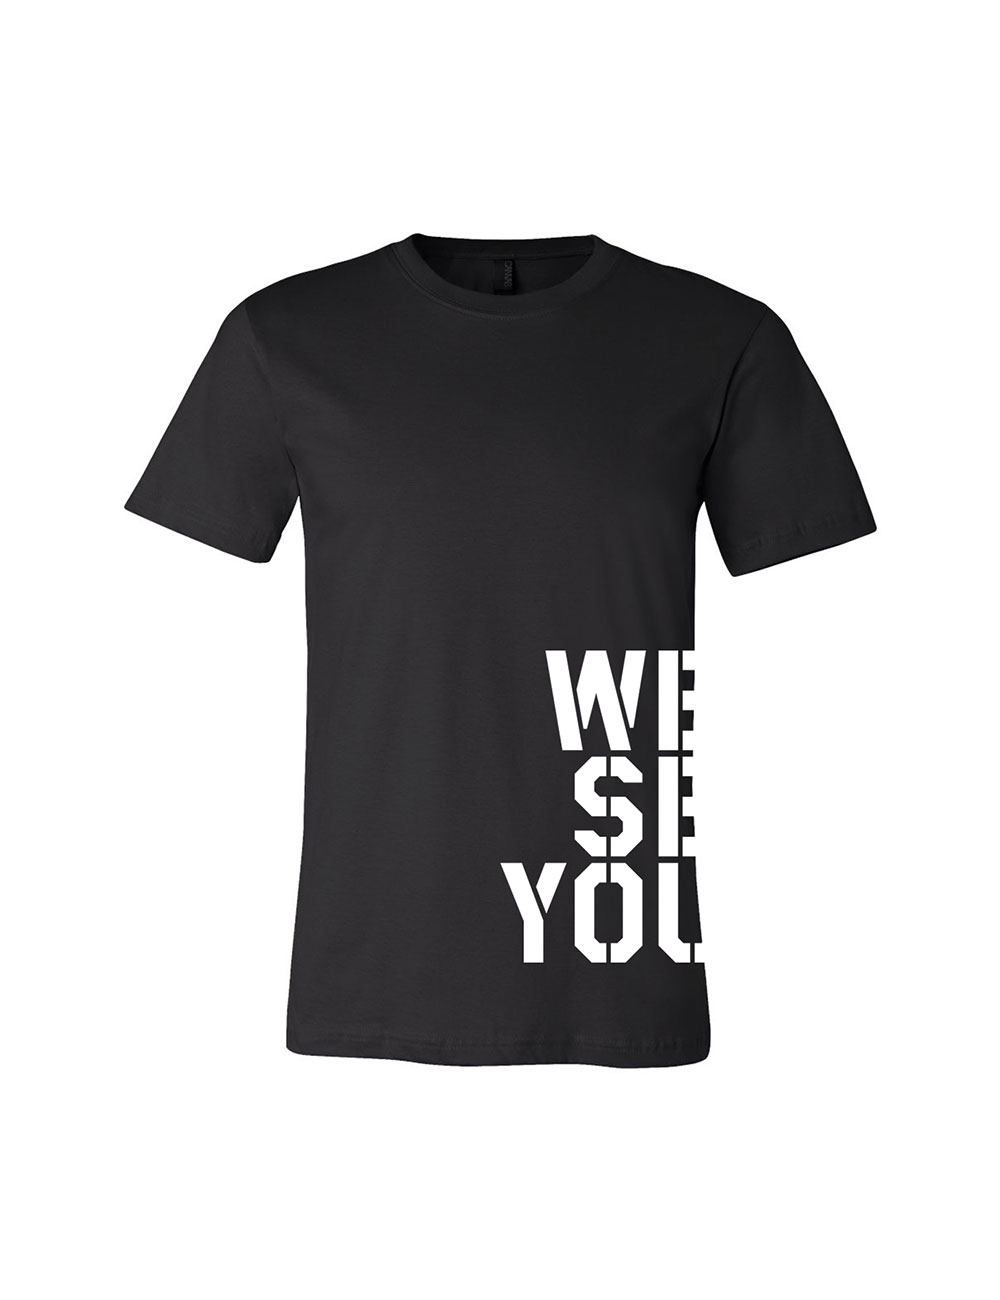 Afropunk - Official Merch Shop - T-Shirts - We See You Tee Front